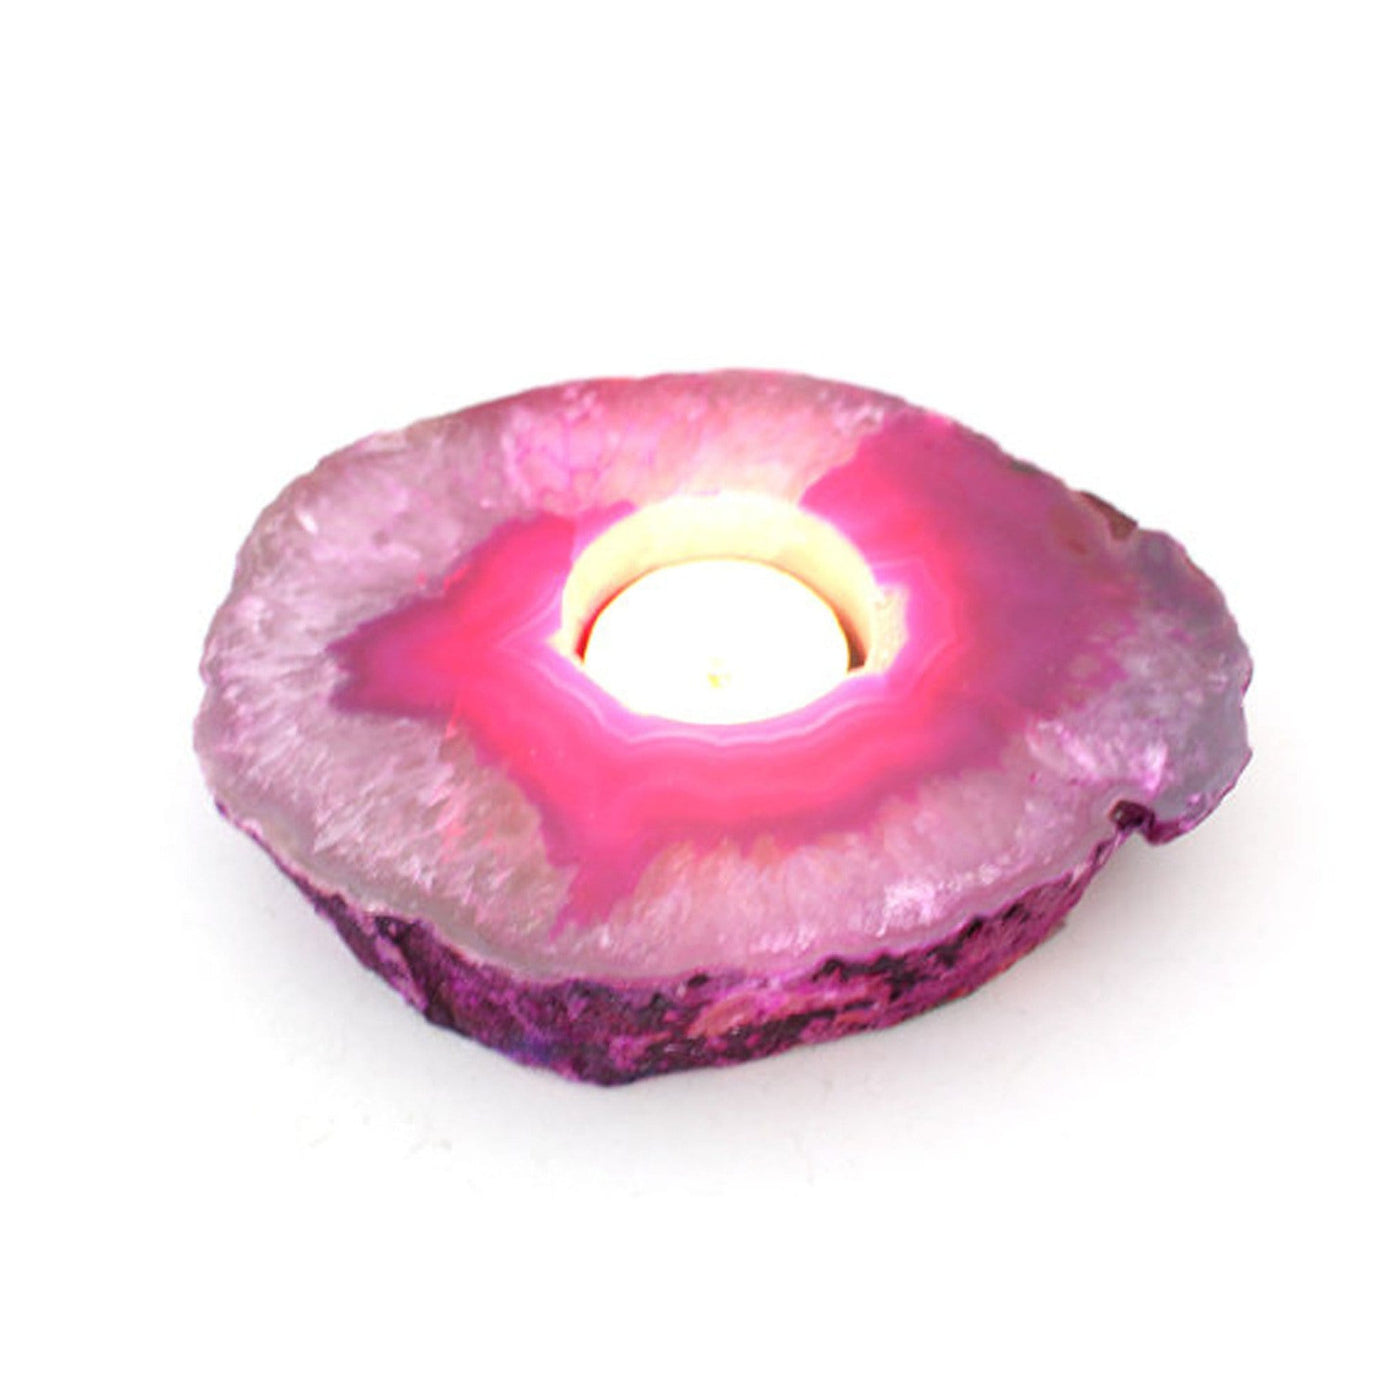 pink agate candle holder on white background